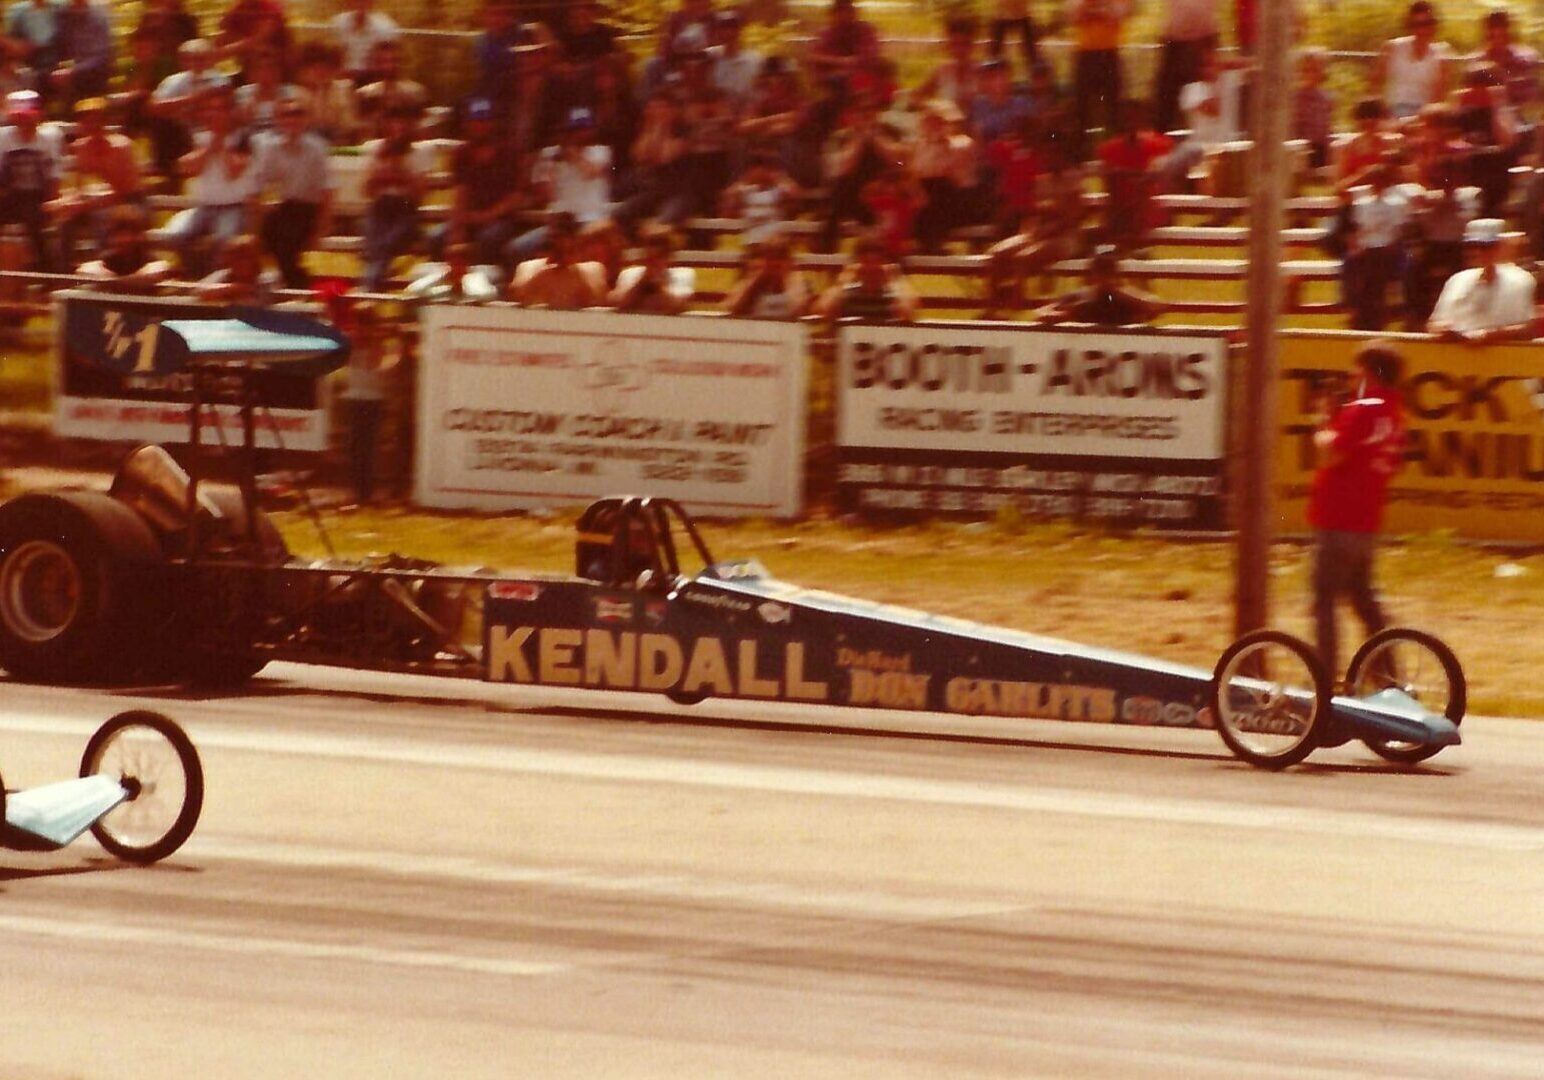 Don Garlits and Tom (T.C.) Lemons built this car in Seffner, FL. It is powered by a General Electric T-58-10 gas turbine, developing 1400 HP running on Kerosene. The engine turns 22,000 RPMs which drives the rear wheels. It was an experimental car with Craig Arfons doing the engine work. Swamp Rat 28 had a top speed of 219 MPH and 6.46 seconds. 